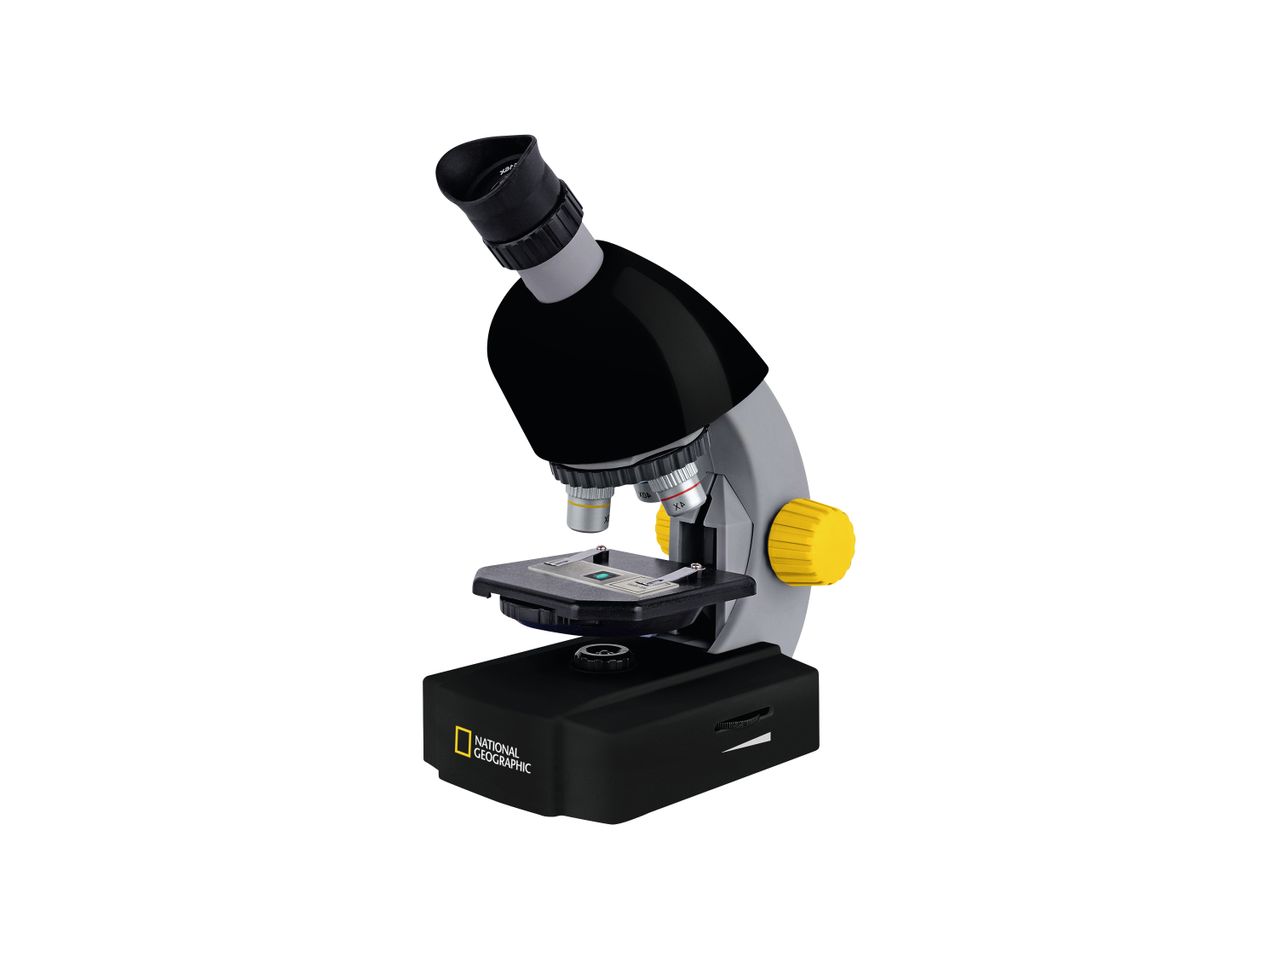 Go to full screen view: National Geographic Telescope+Microscope Set - Image 1